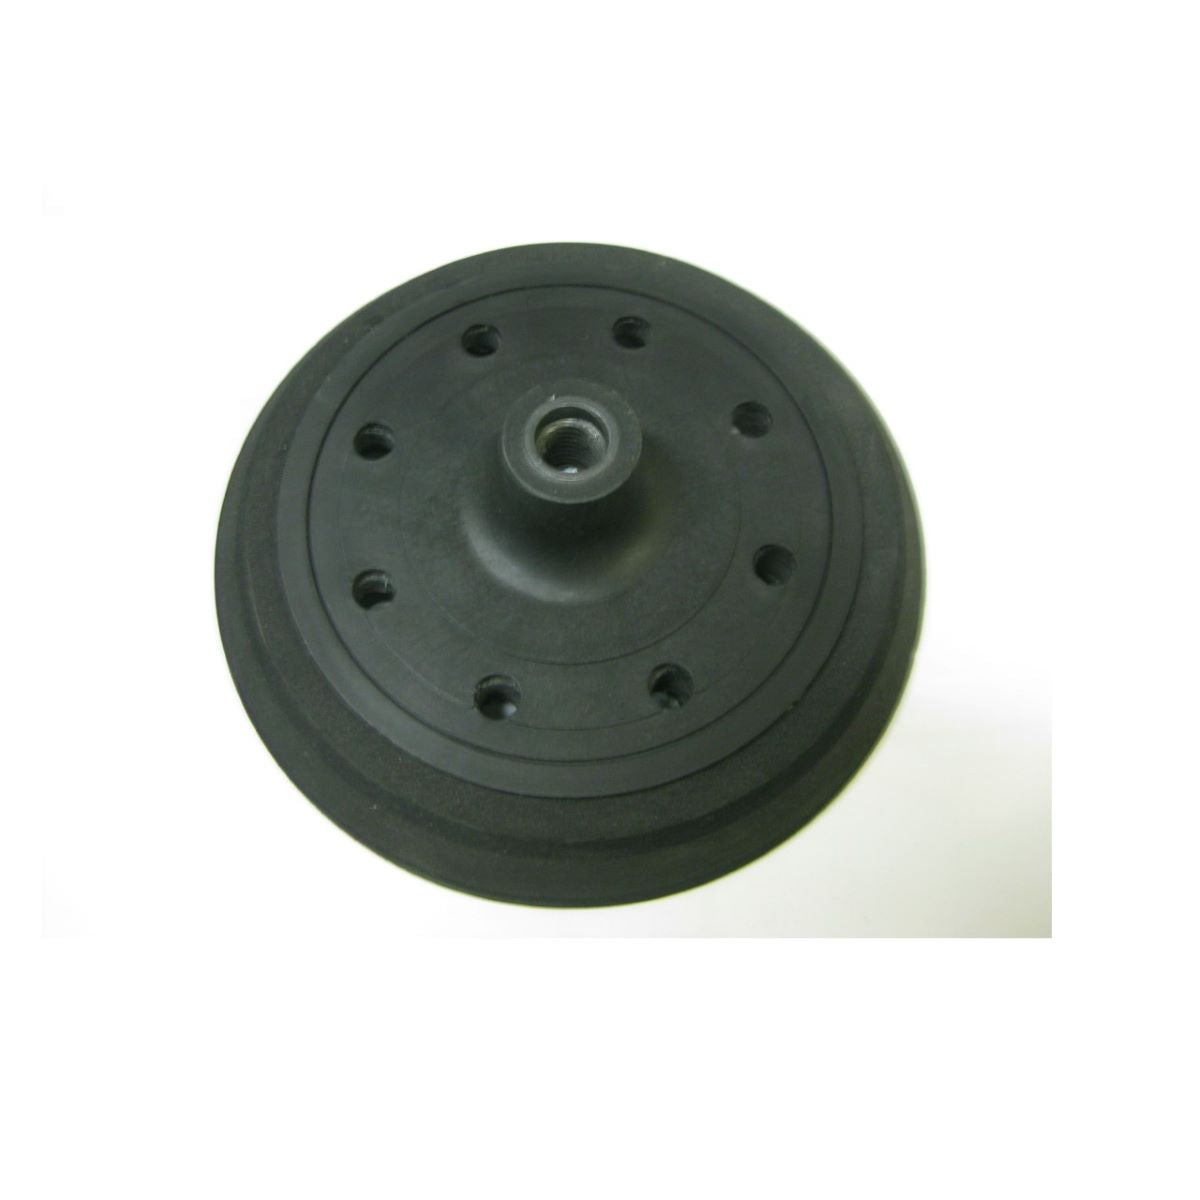 6" 16 Hole (8 Inner & 8 Outer Holes) Black Hook Rotary Pad w/ Center Screw - For Rotary Sander Hook Discs